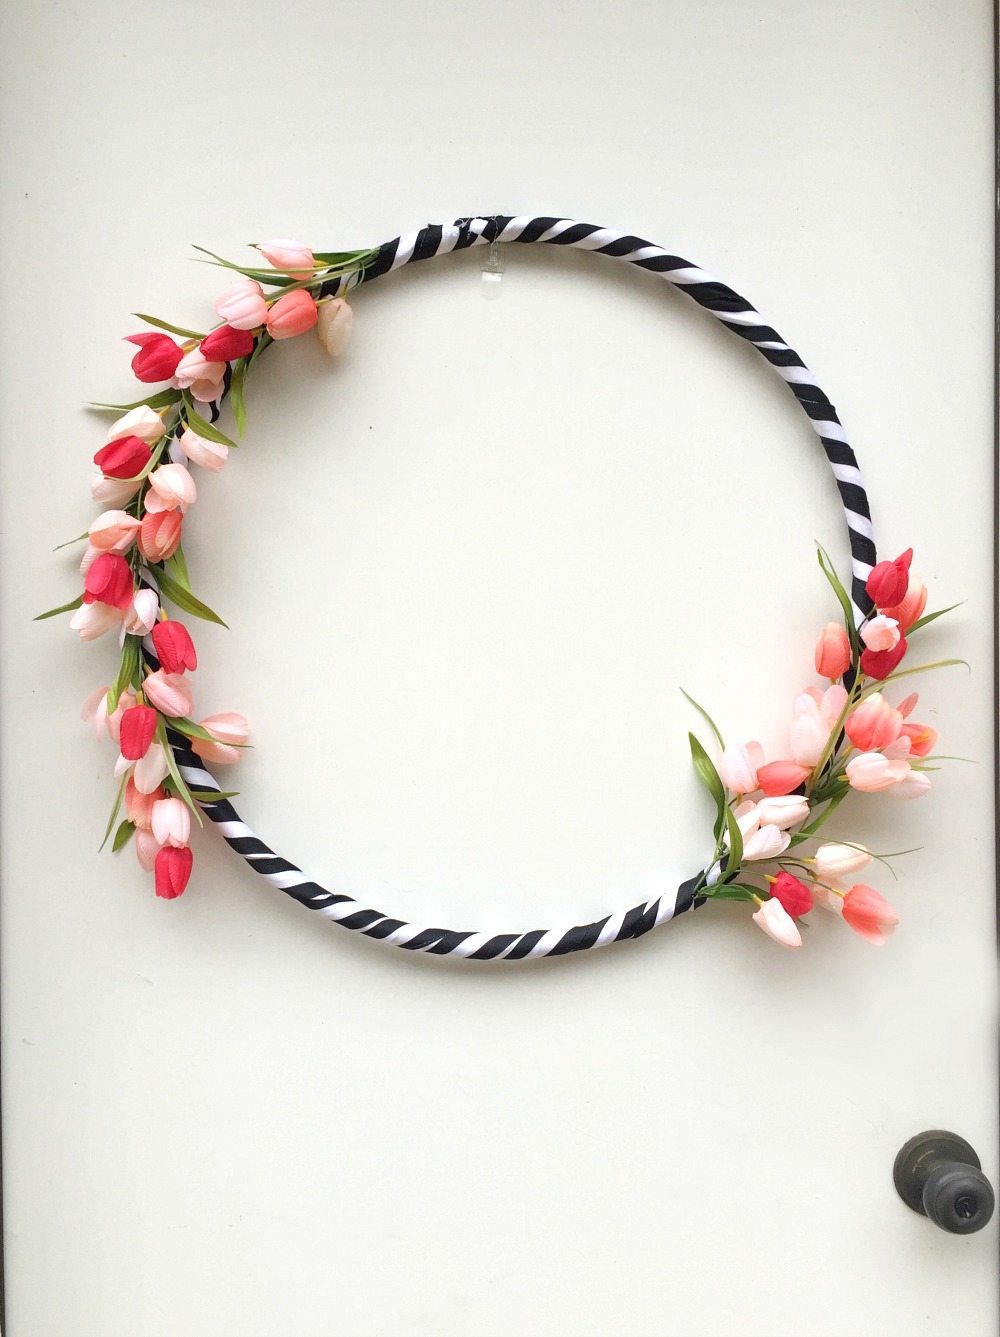 Hula Hoop spring wreath with black and white ribbon